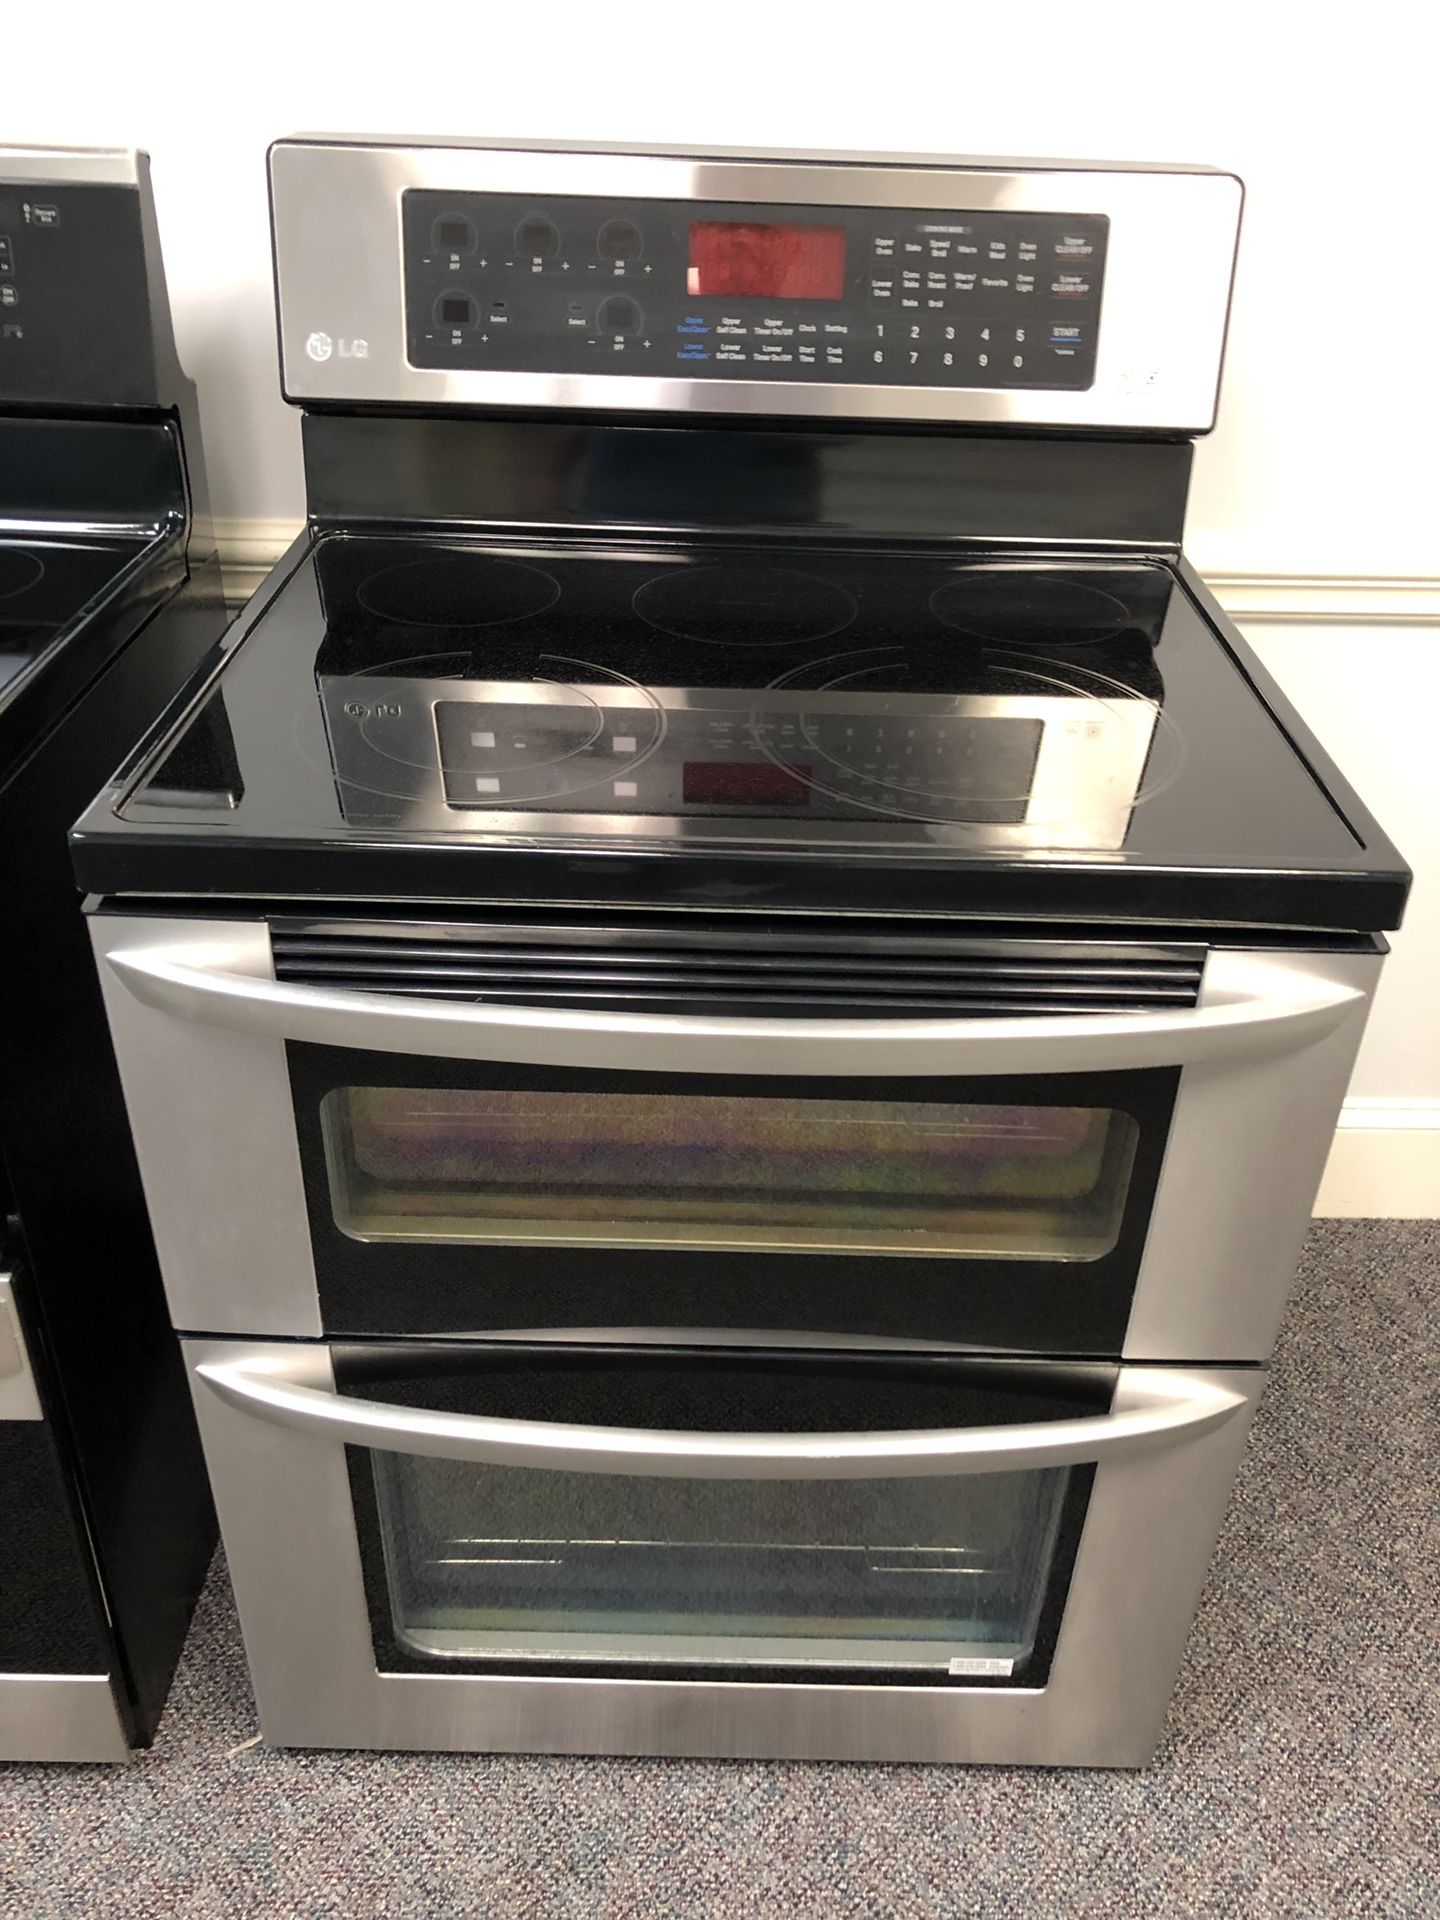 LG 5 BURNER GLASS TOP CONVECTION DOUBLE OVEN STOVE